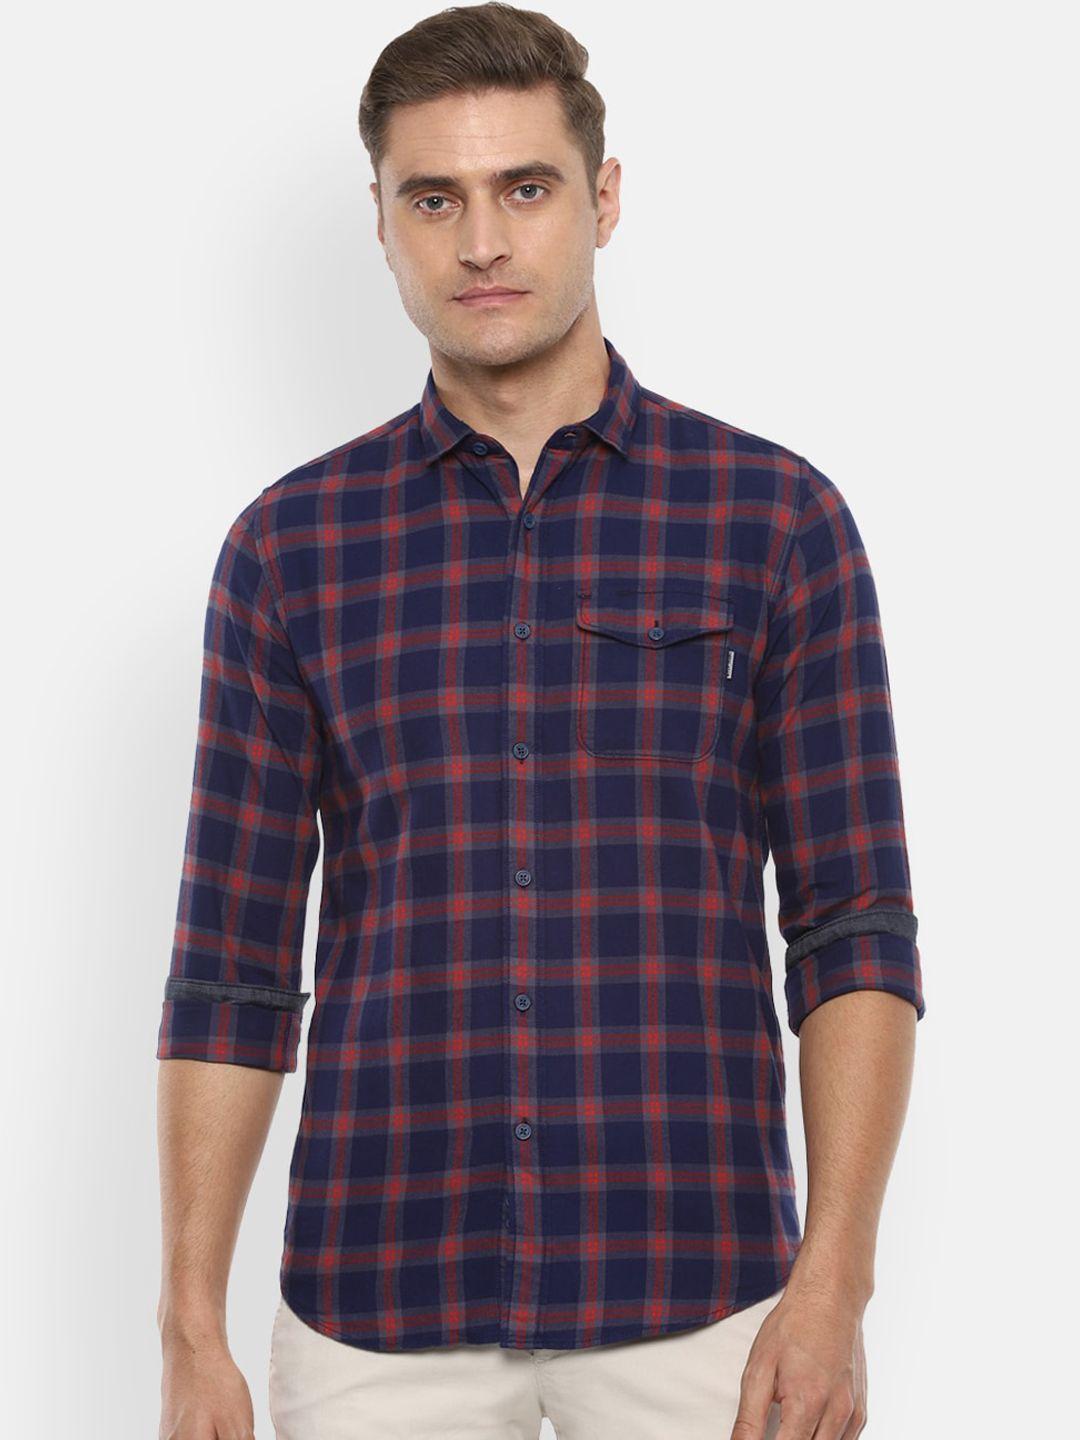 louis-philippe-jeans-men-navy-blue-&-red-slim-fit-checked-casual-shirt